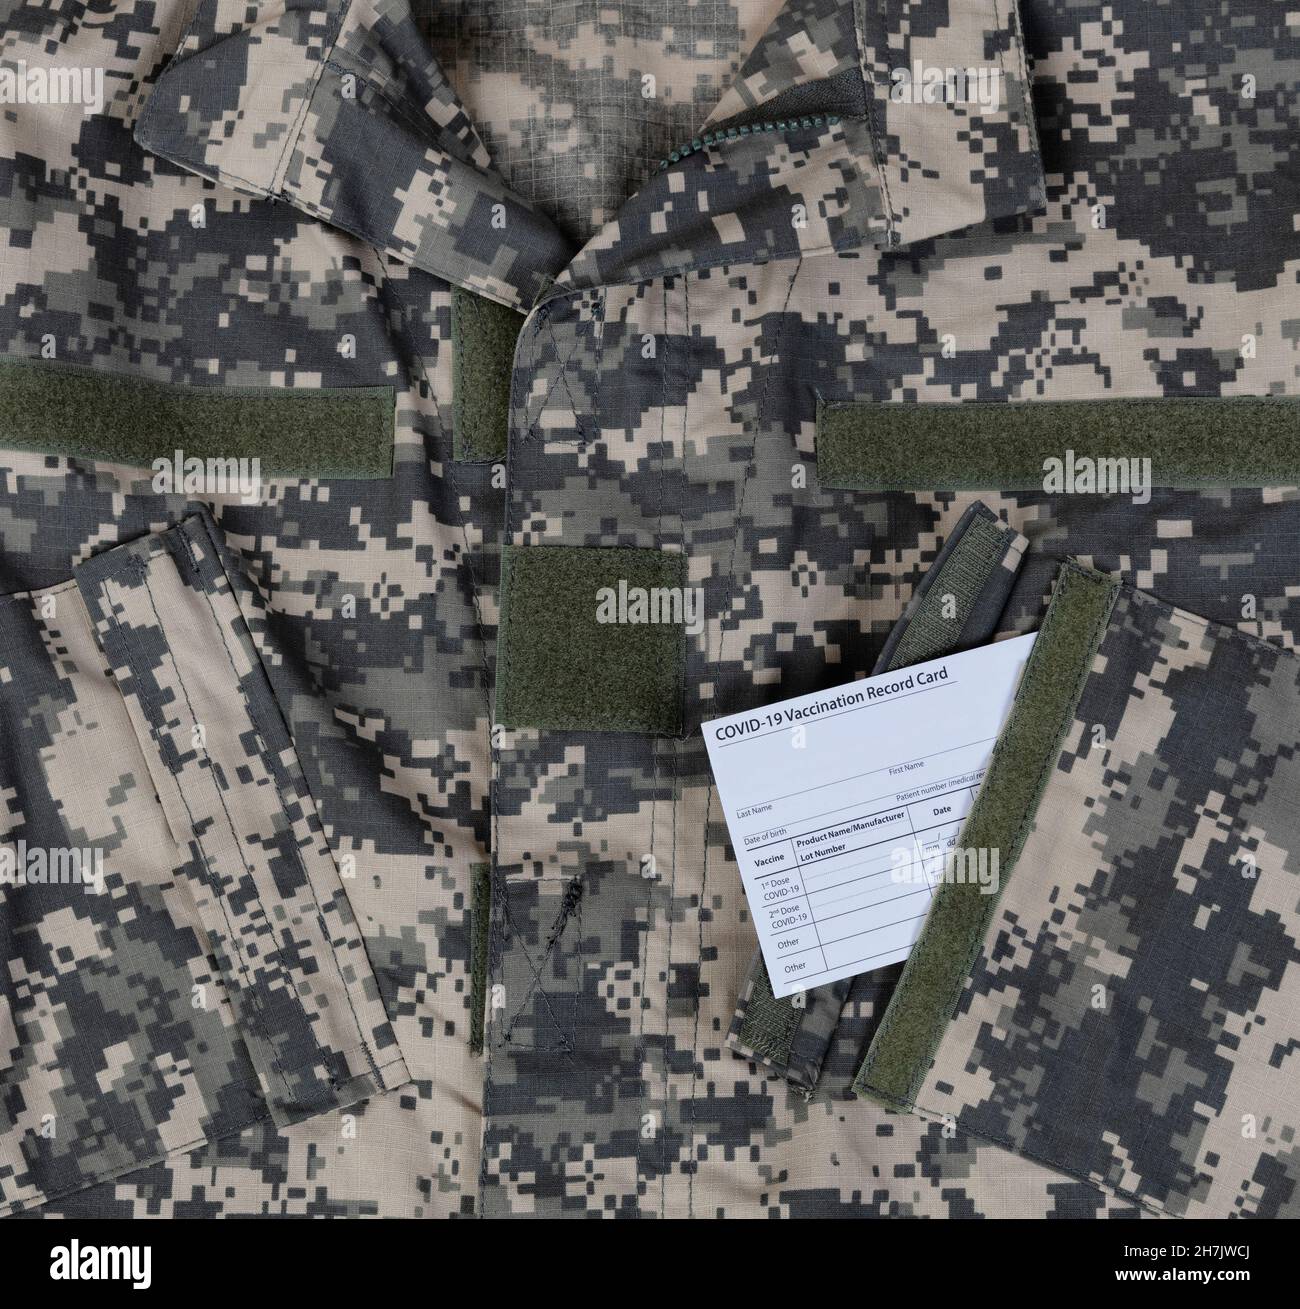 A military uniform top with Covid 19 vaccine card in pocket Stock Photo